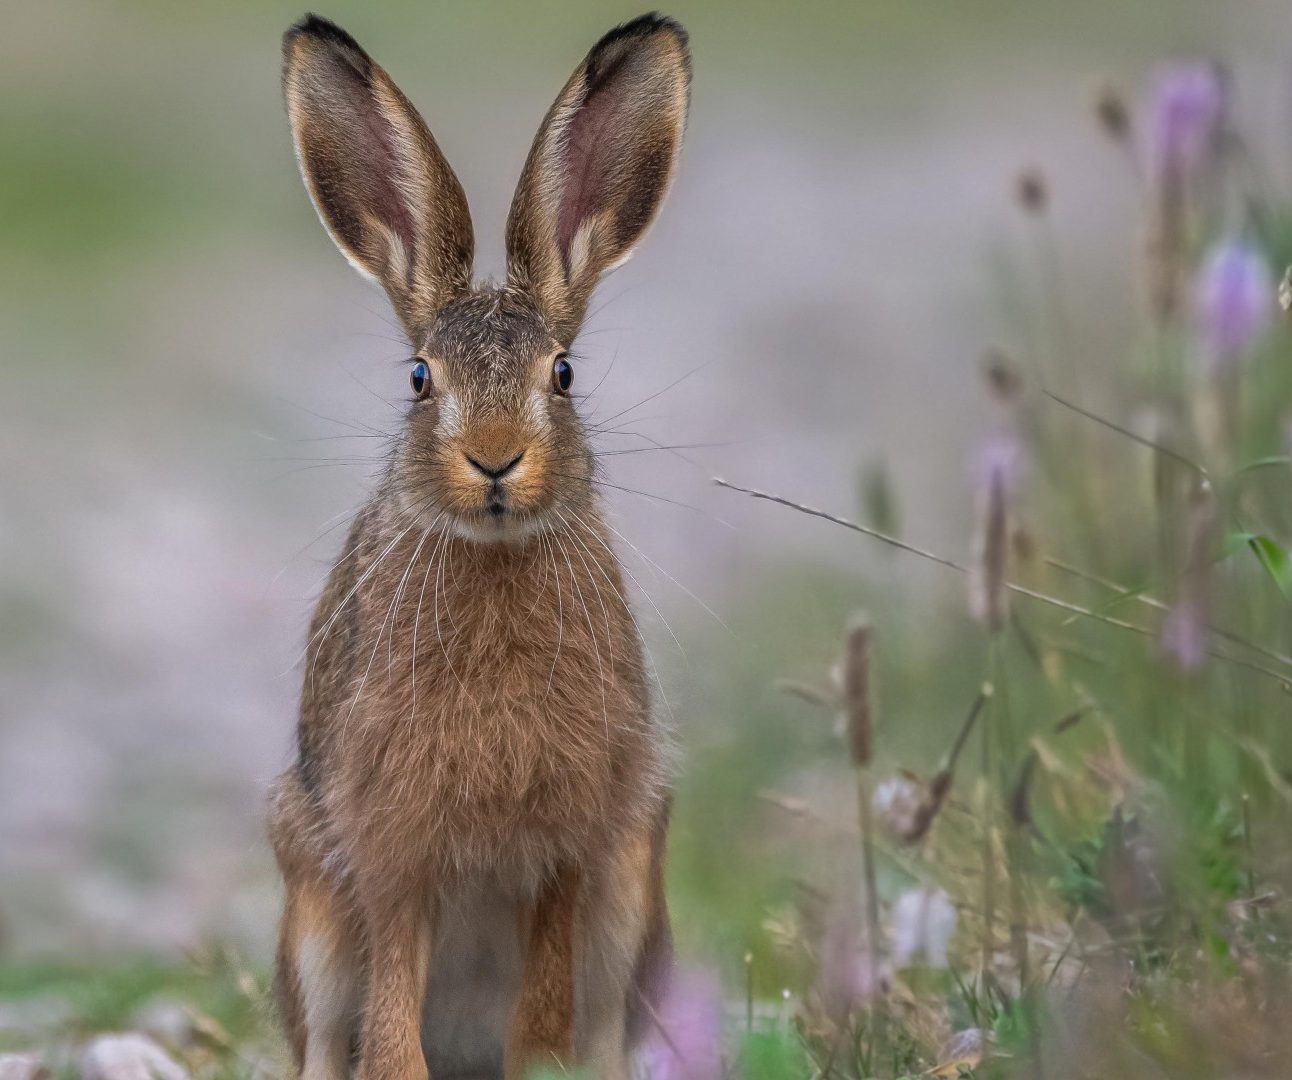 A hare sitting in a meadow of long grass and wild flowers